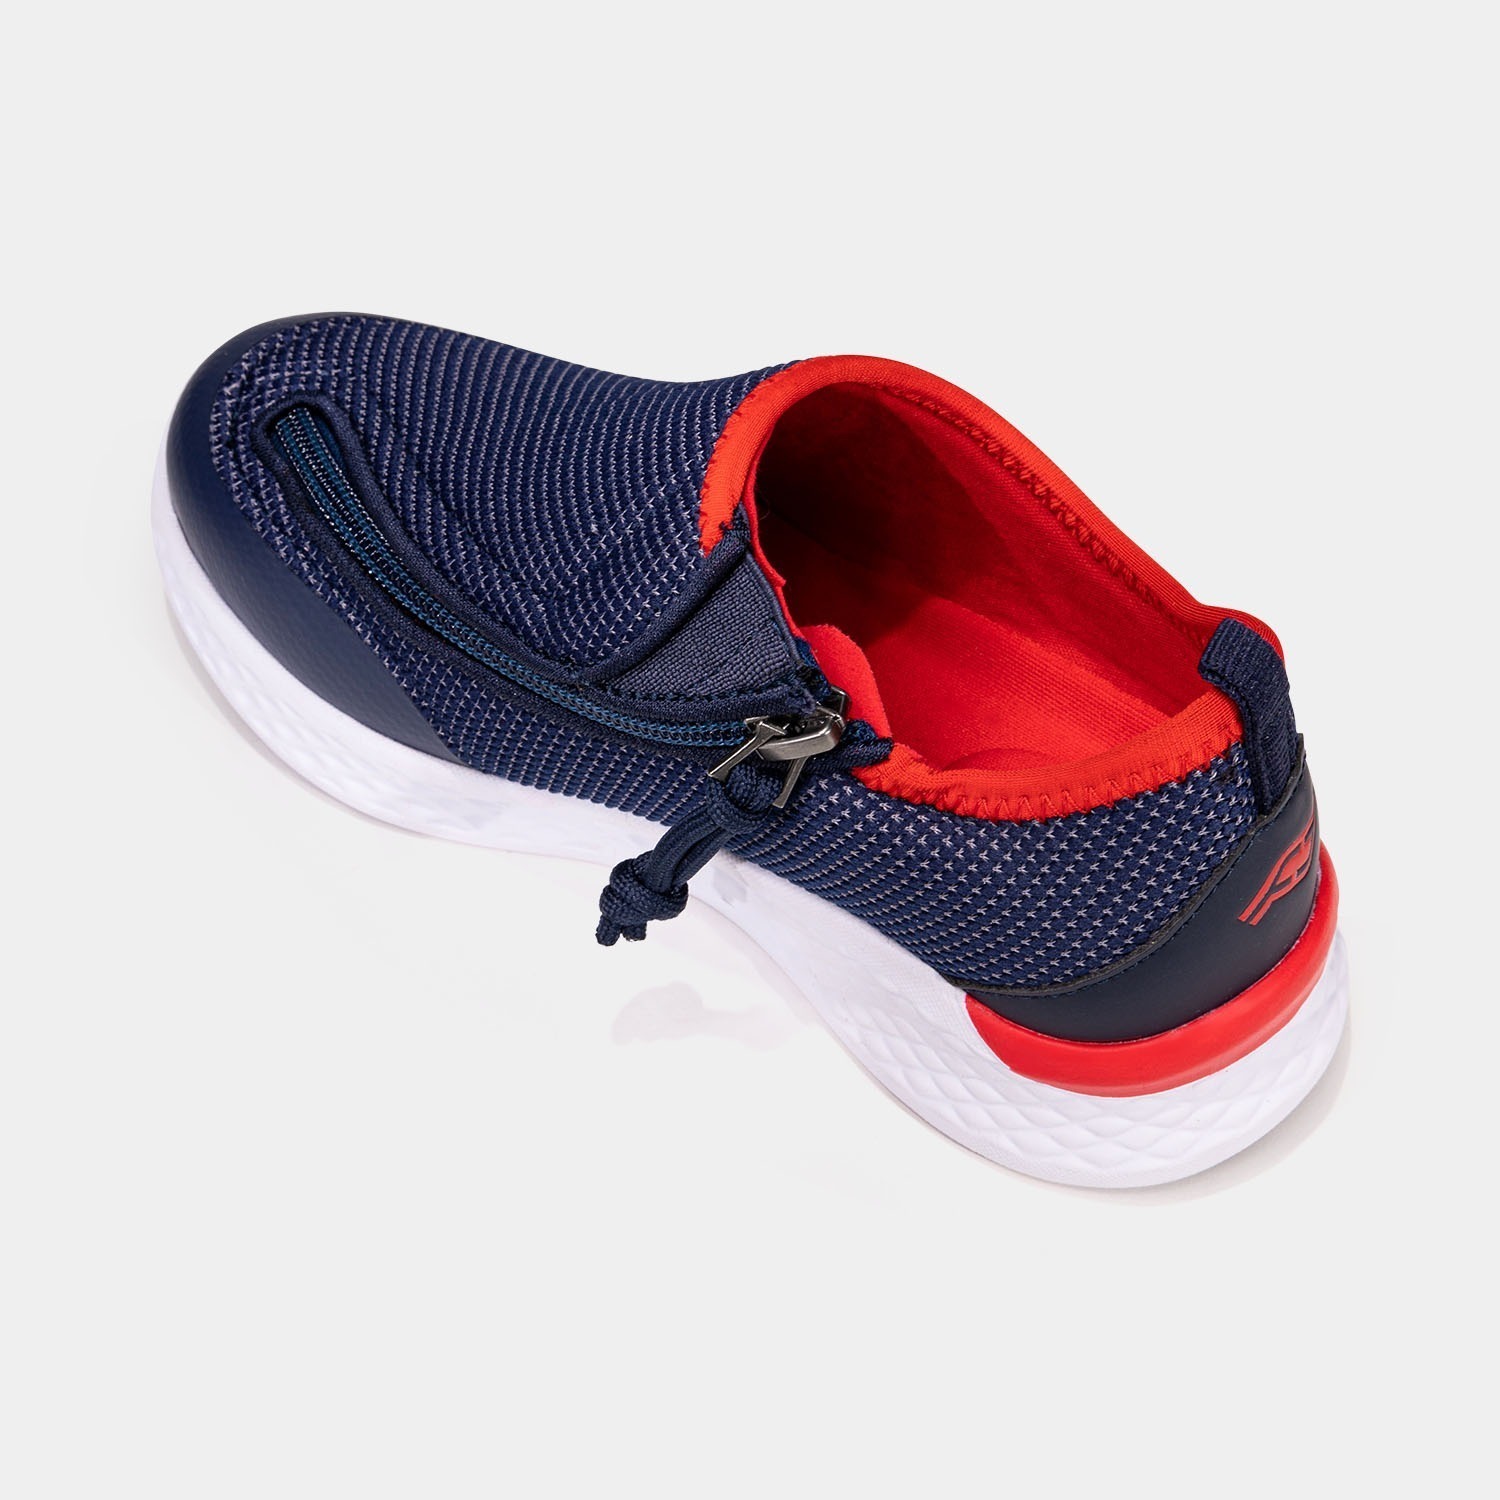 Kid's Force Navy Blue & Red - Friendly Shoes - The Shoe for All Abilities